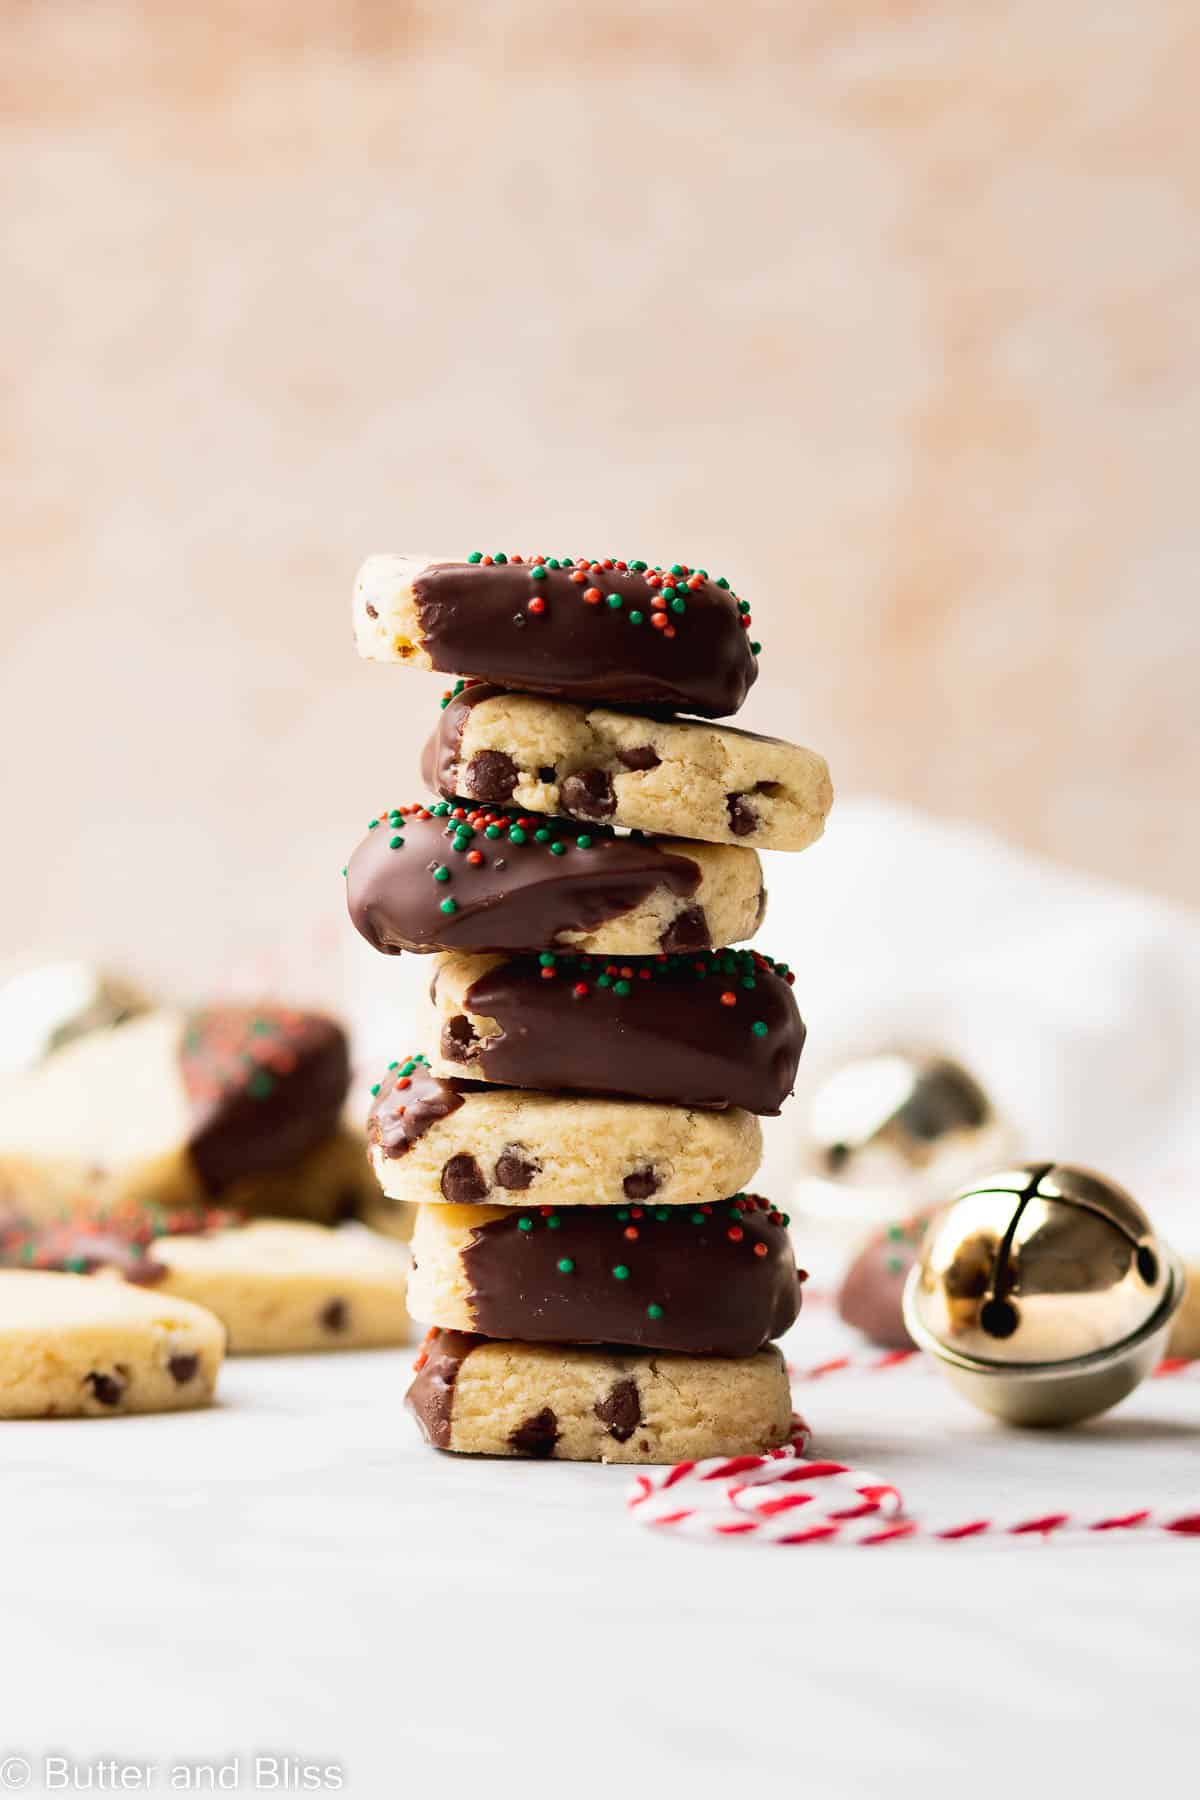 A stack of chocolate dipped chocolate chip sugar cookie bites.